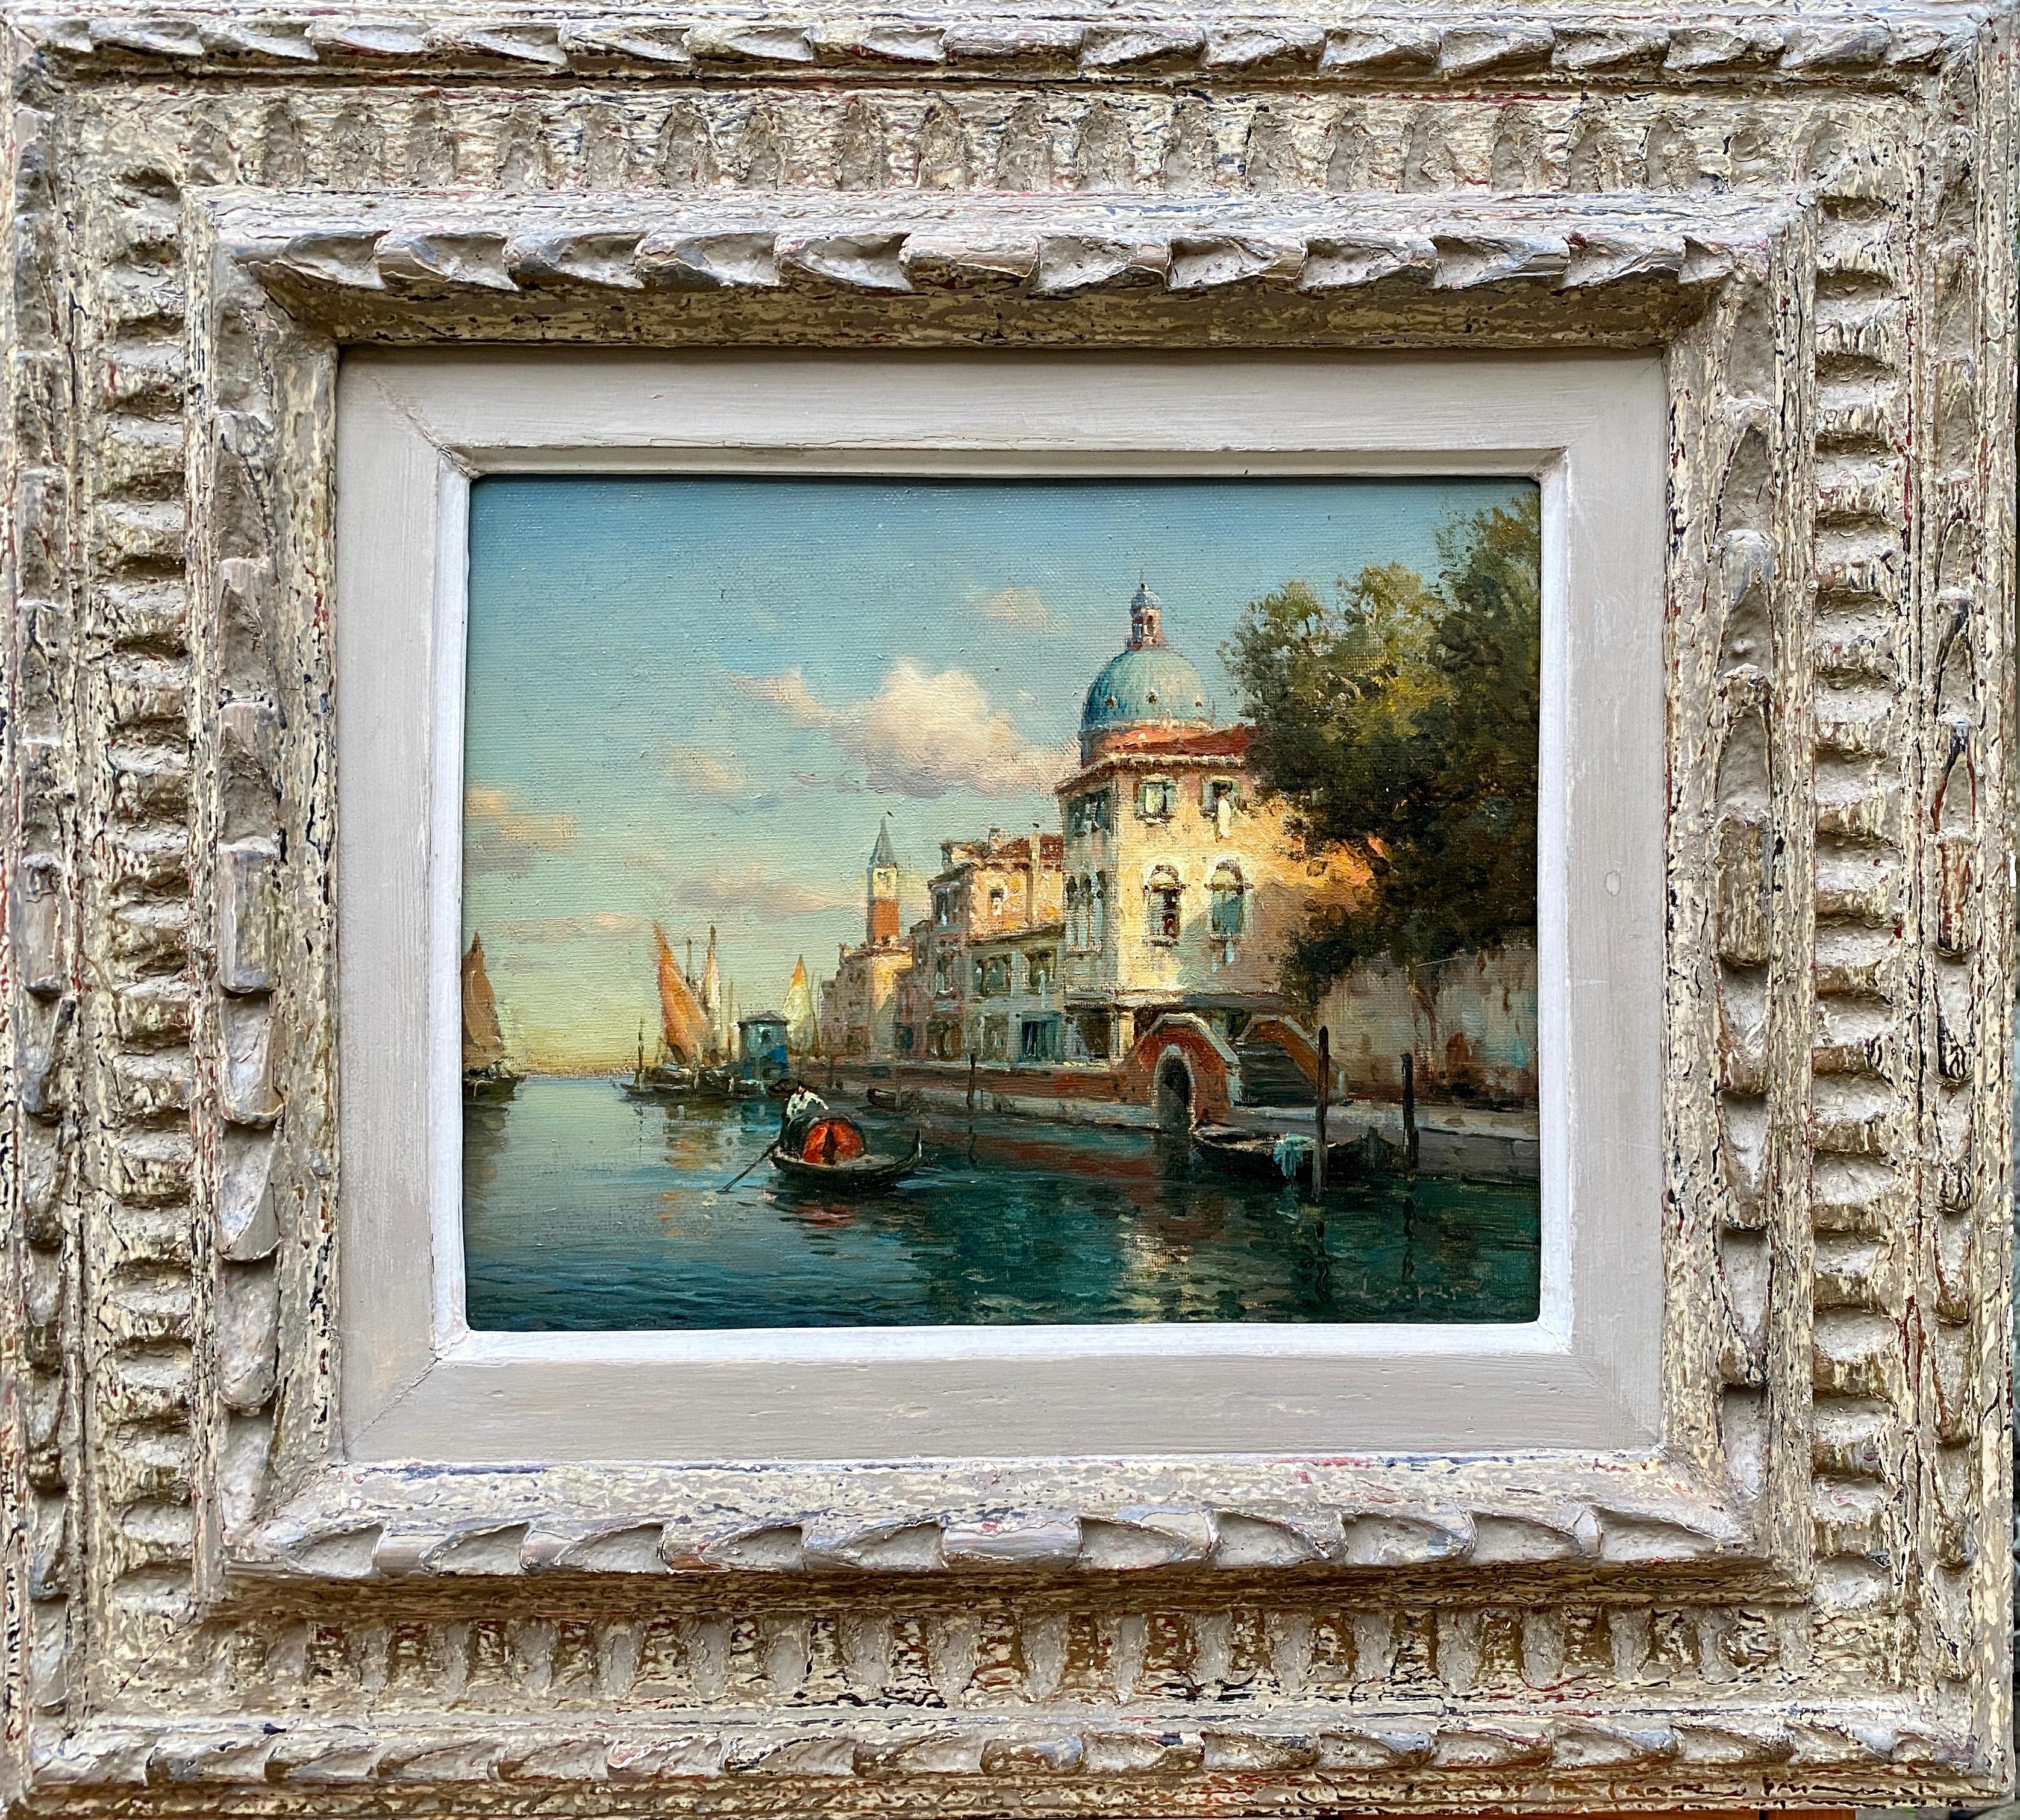 A View of Venice by Antoine Bouvard, Saint-Jean-de-Bournay 1870 – 1955, French